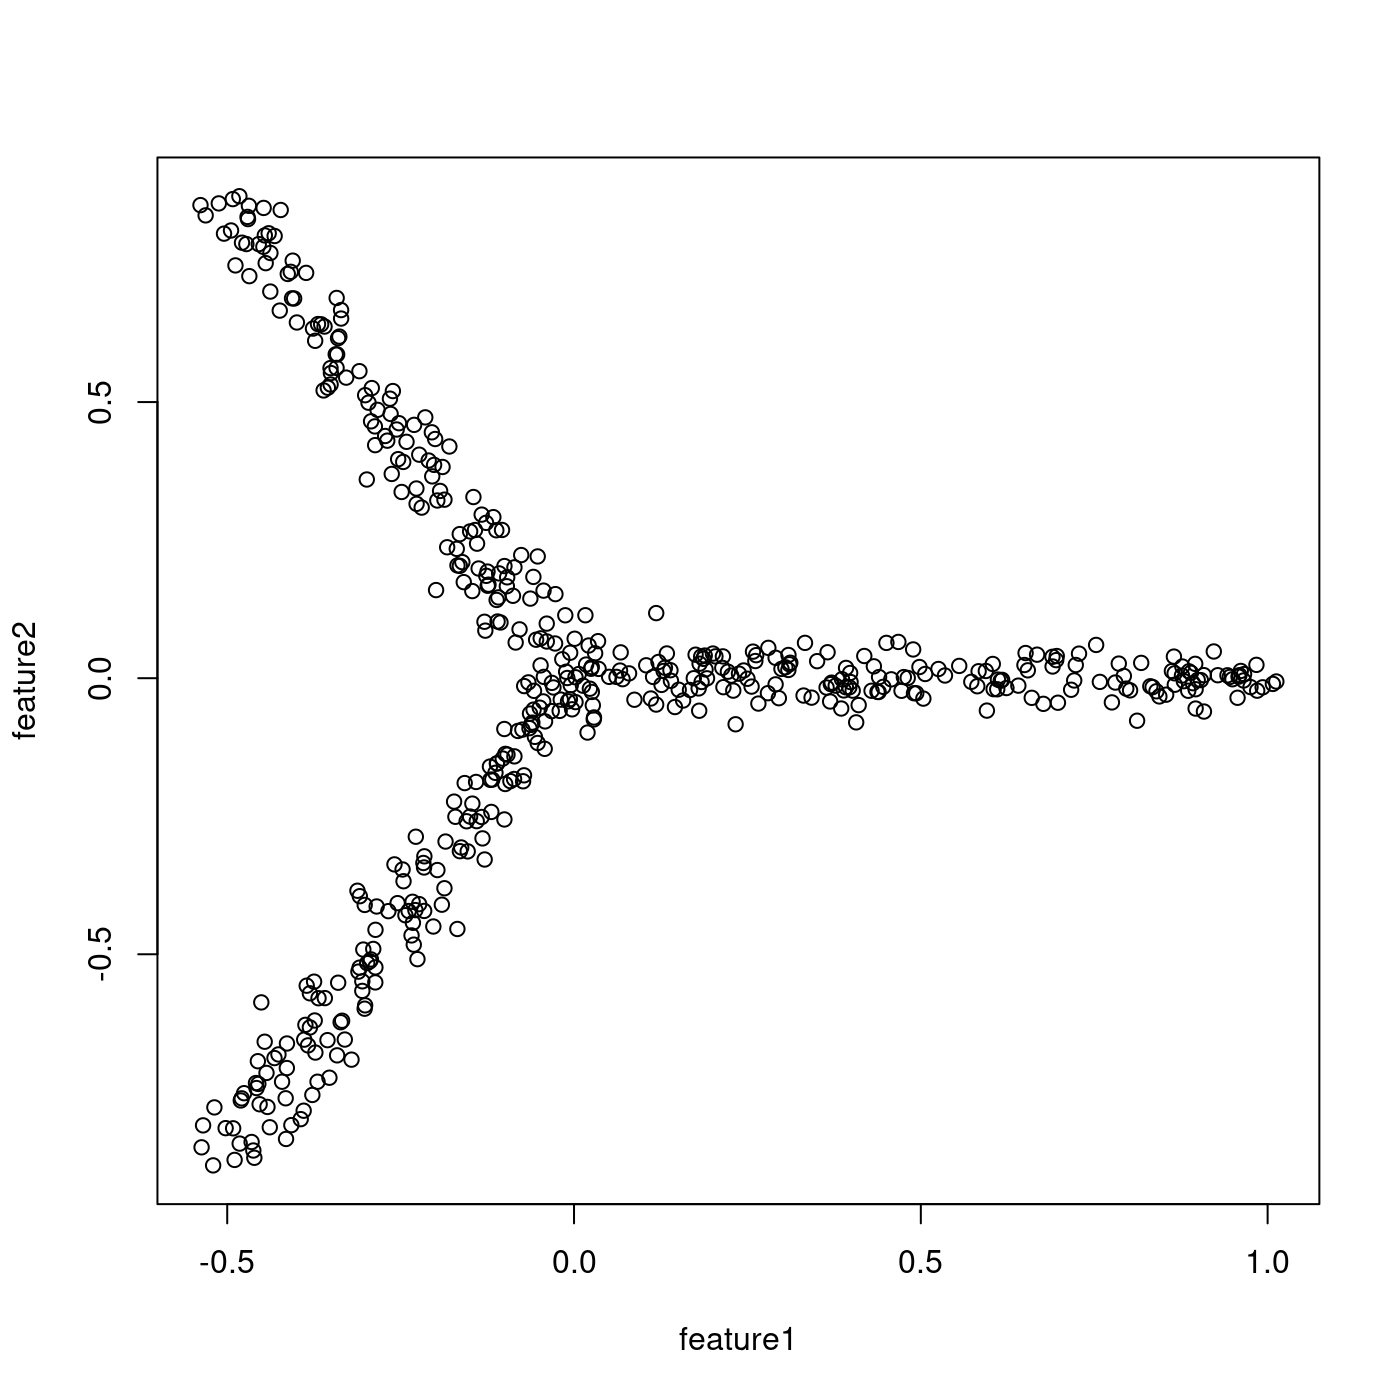 Figure 1. A scatter plot of tree-like toy data generated by Treefit